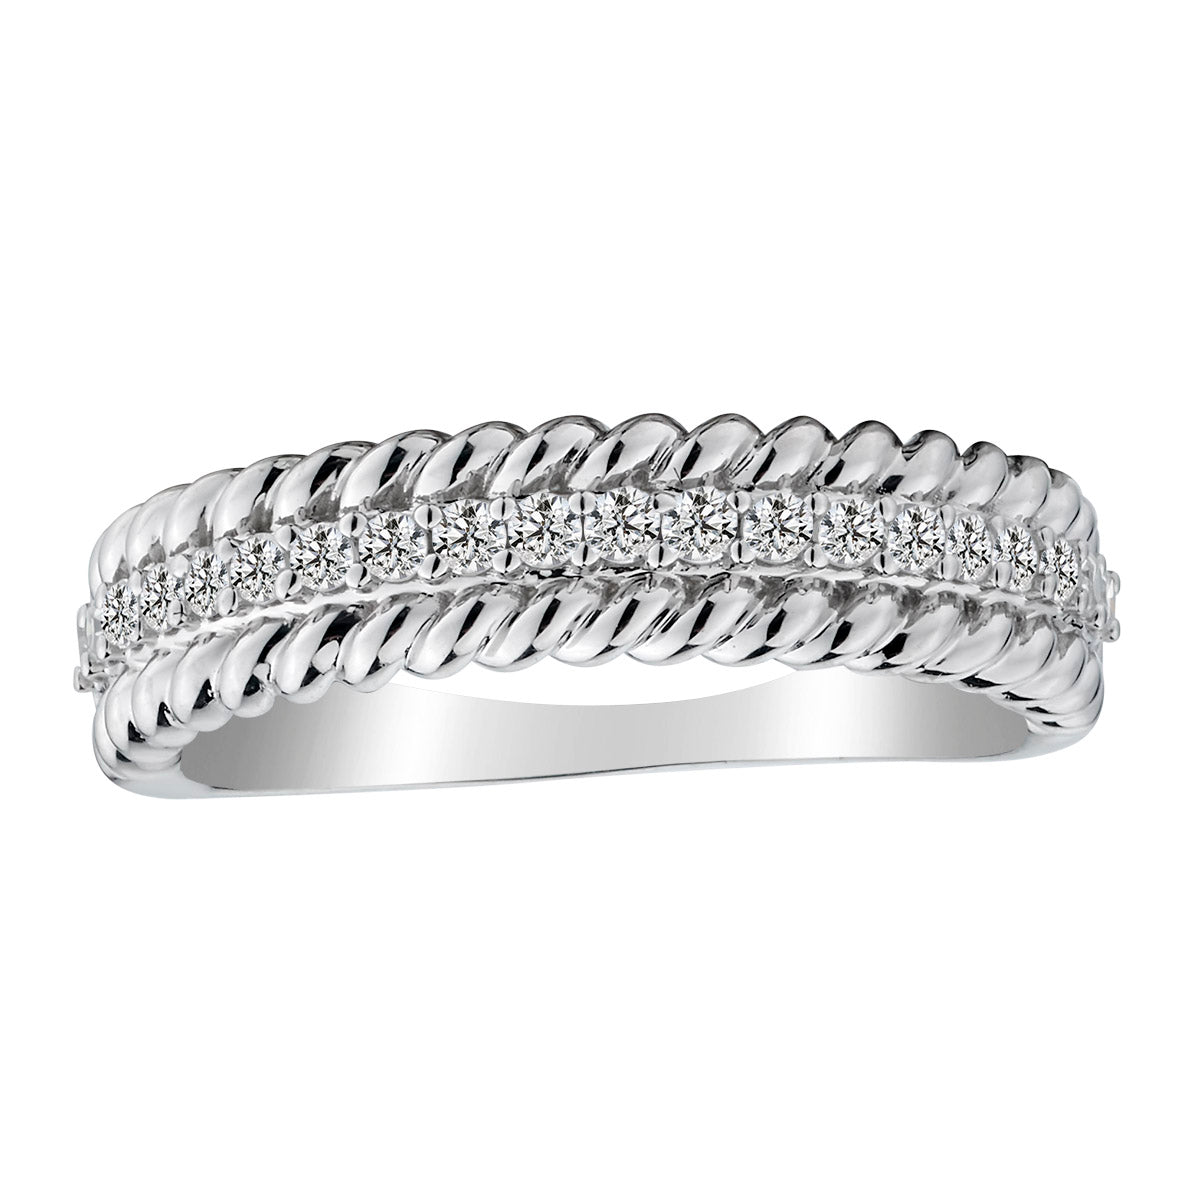 .20 Carat of Diamonds Band, Silver.....................NOW